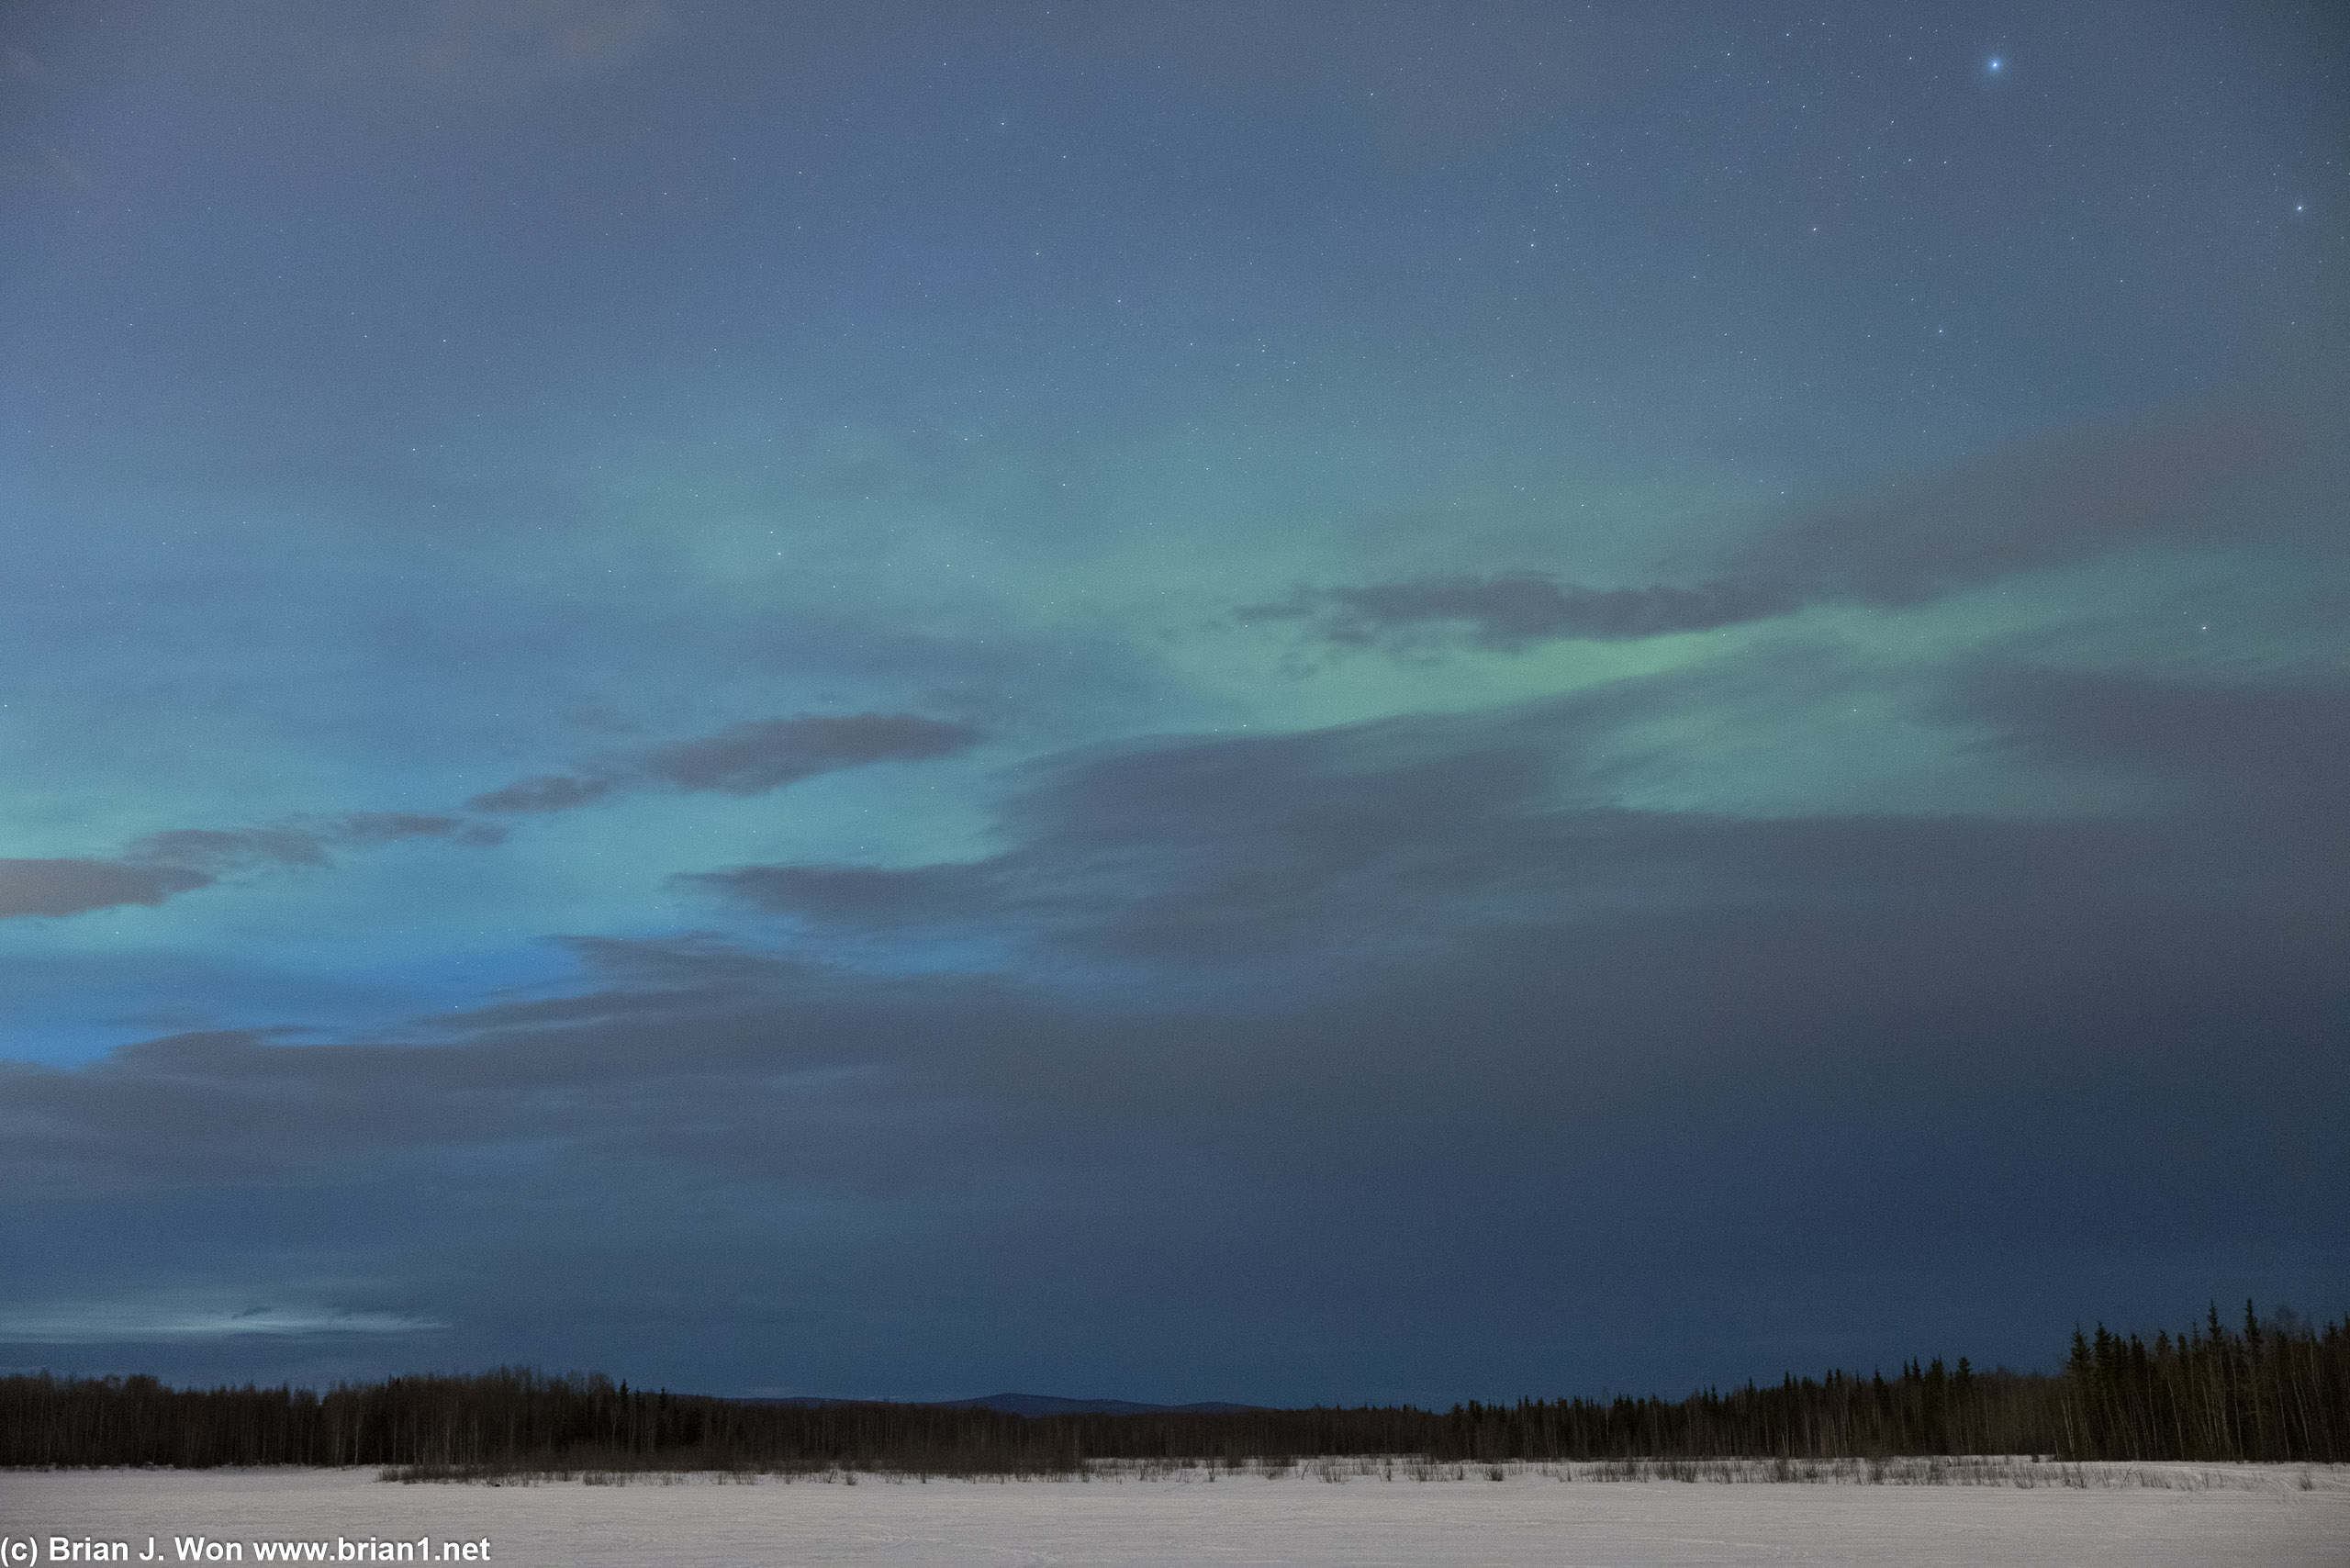 Apparently about 4am the clouds lifted and the northern lights were great, but midnight was not nearly as good.